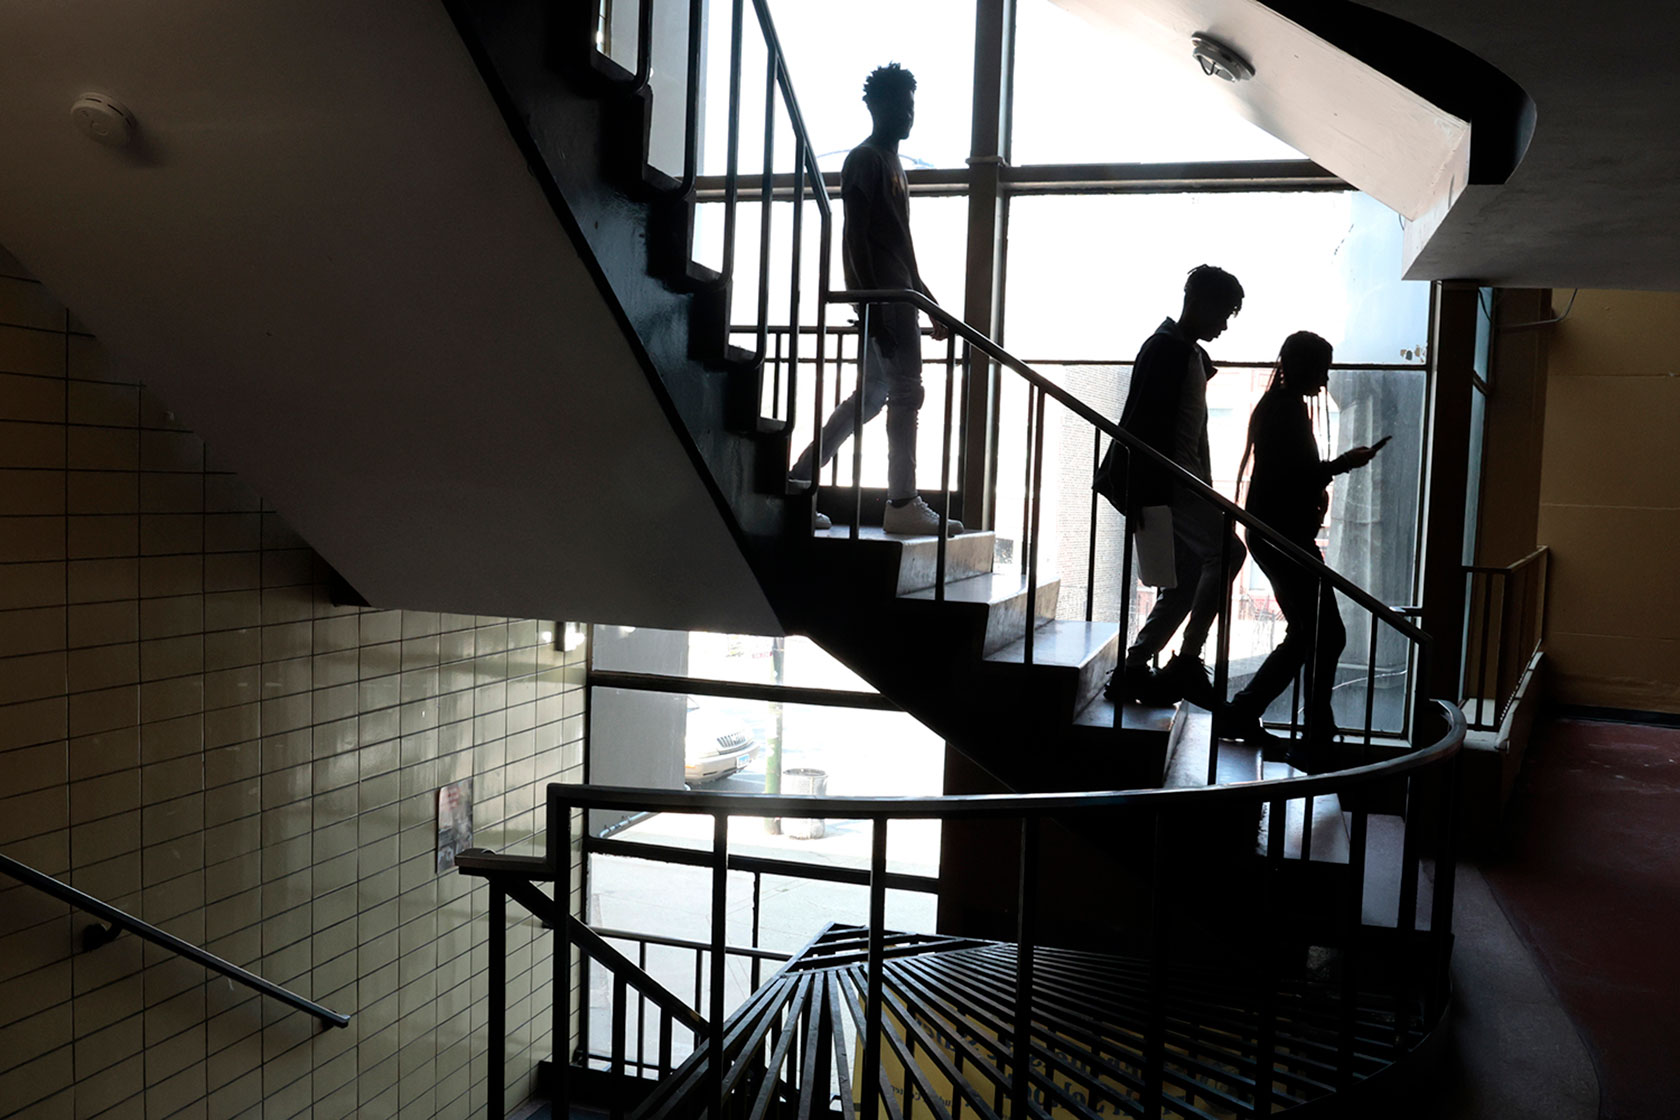 Photo shows three students walking down stairs, silhouetted against a large window showing a grey sky outside